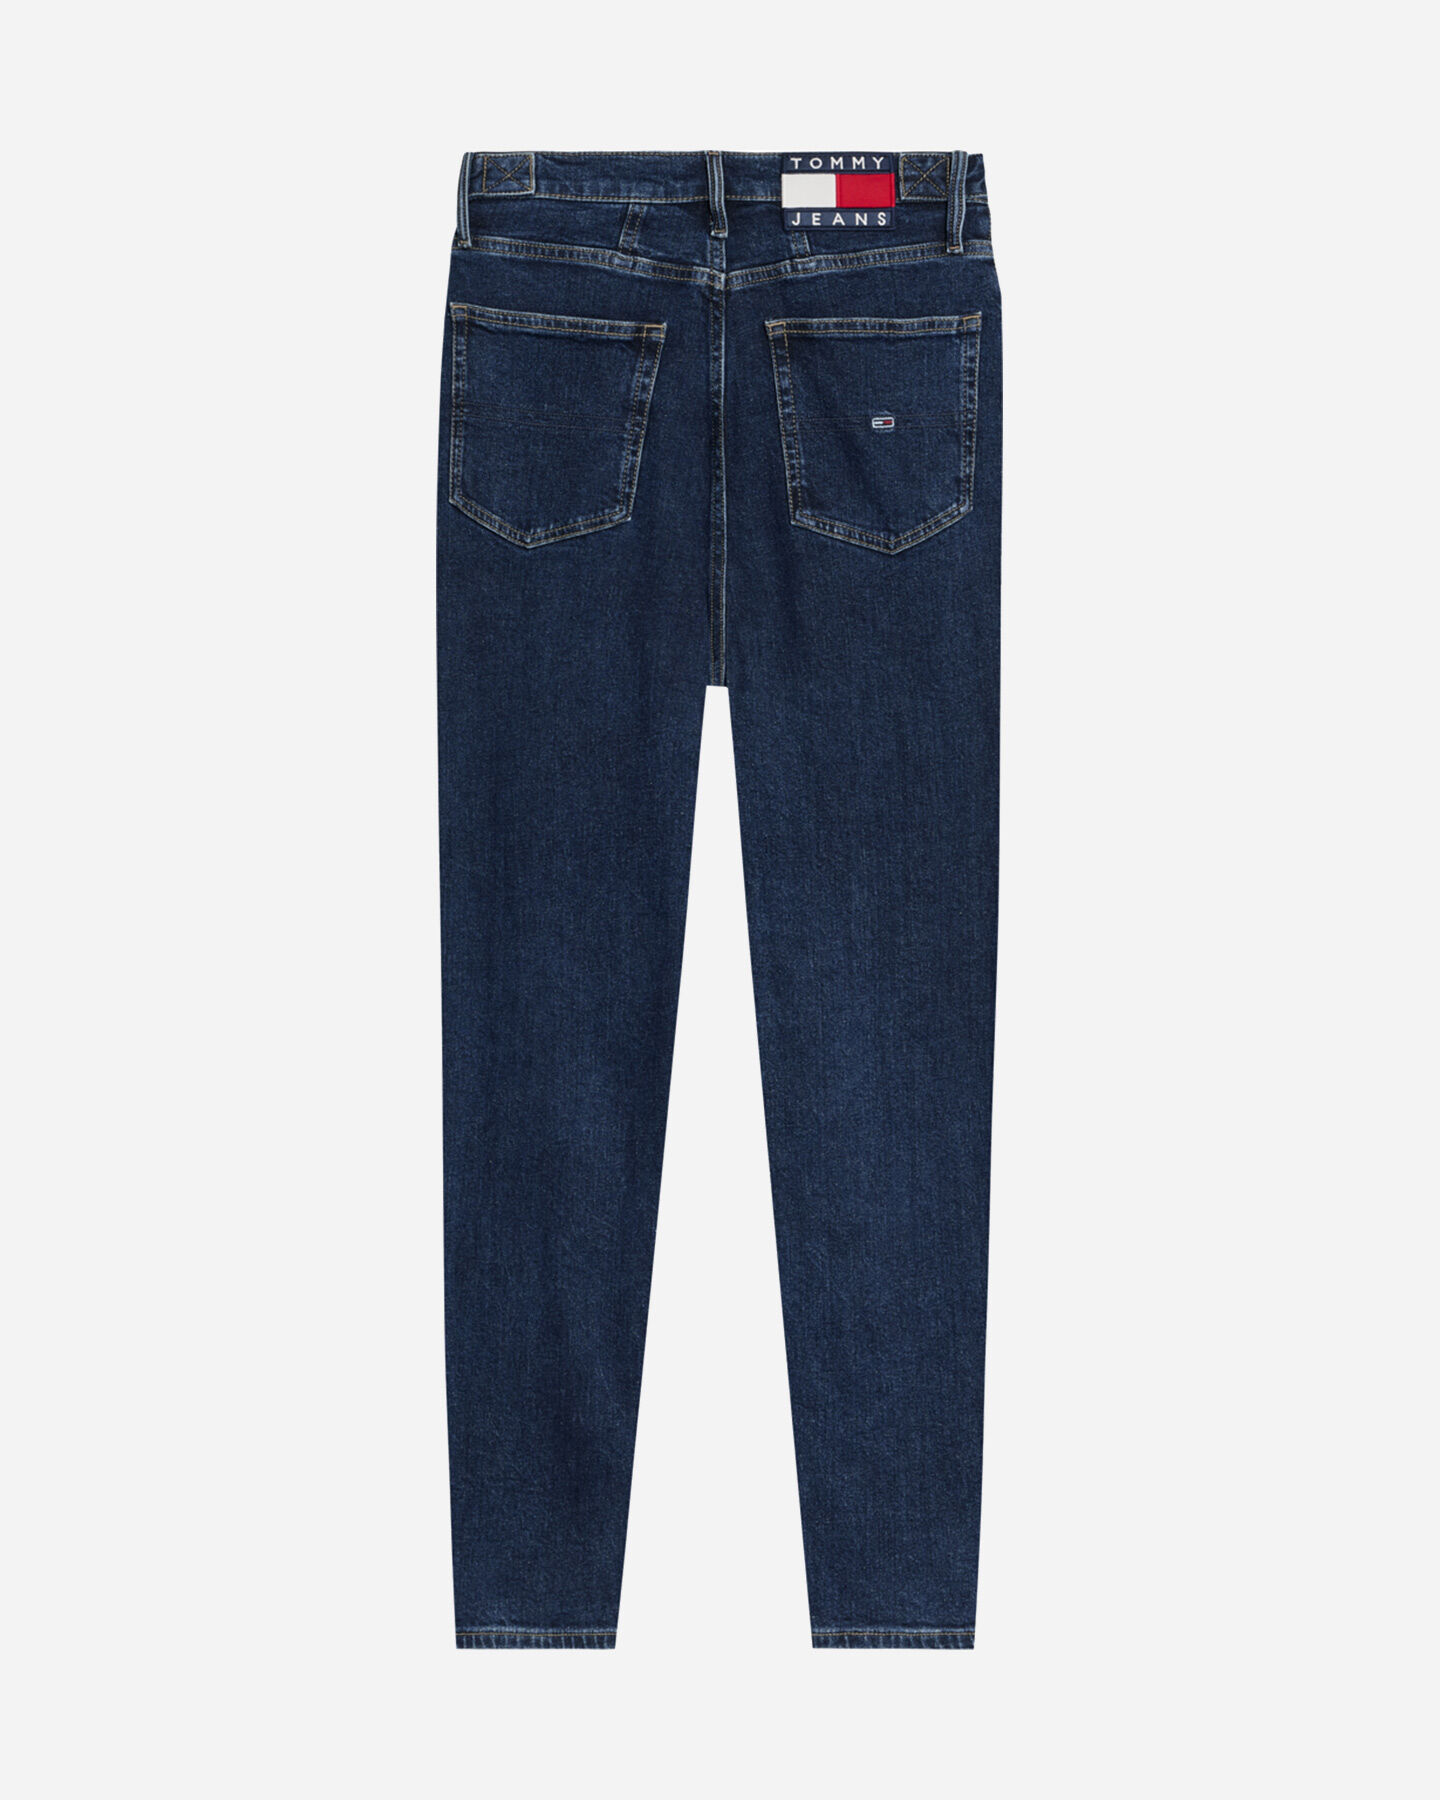  Jeans TOMMY HILFIGER MOM UHR L30 W S4115047|1BK|26 scatto 1